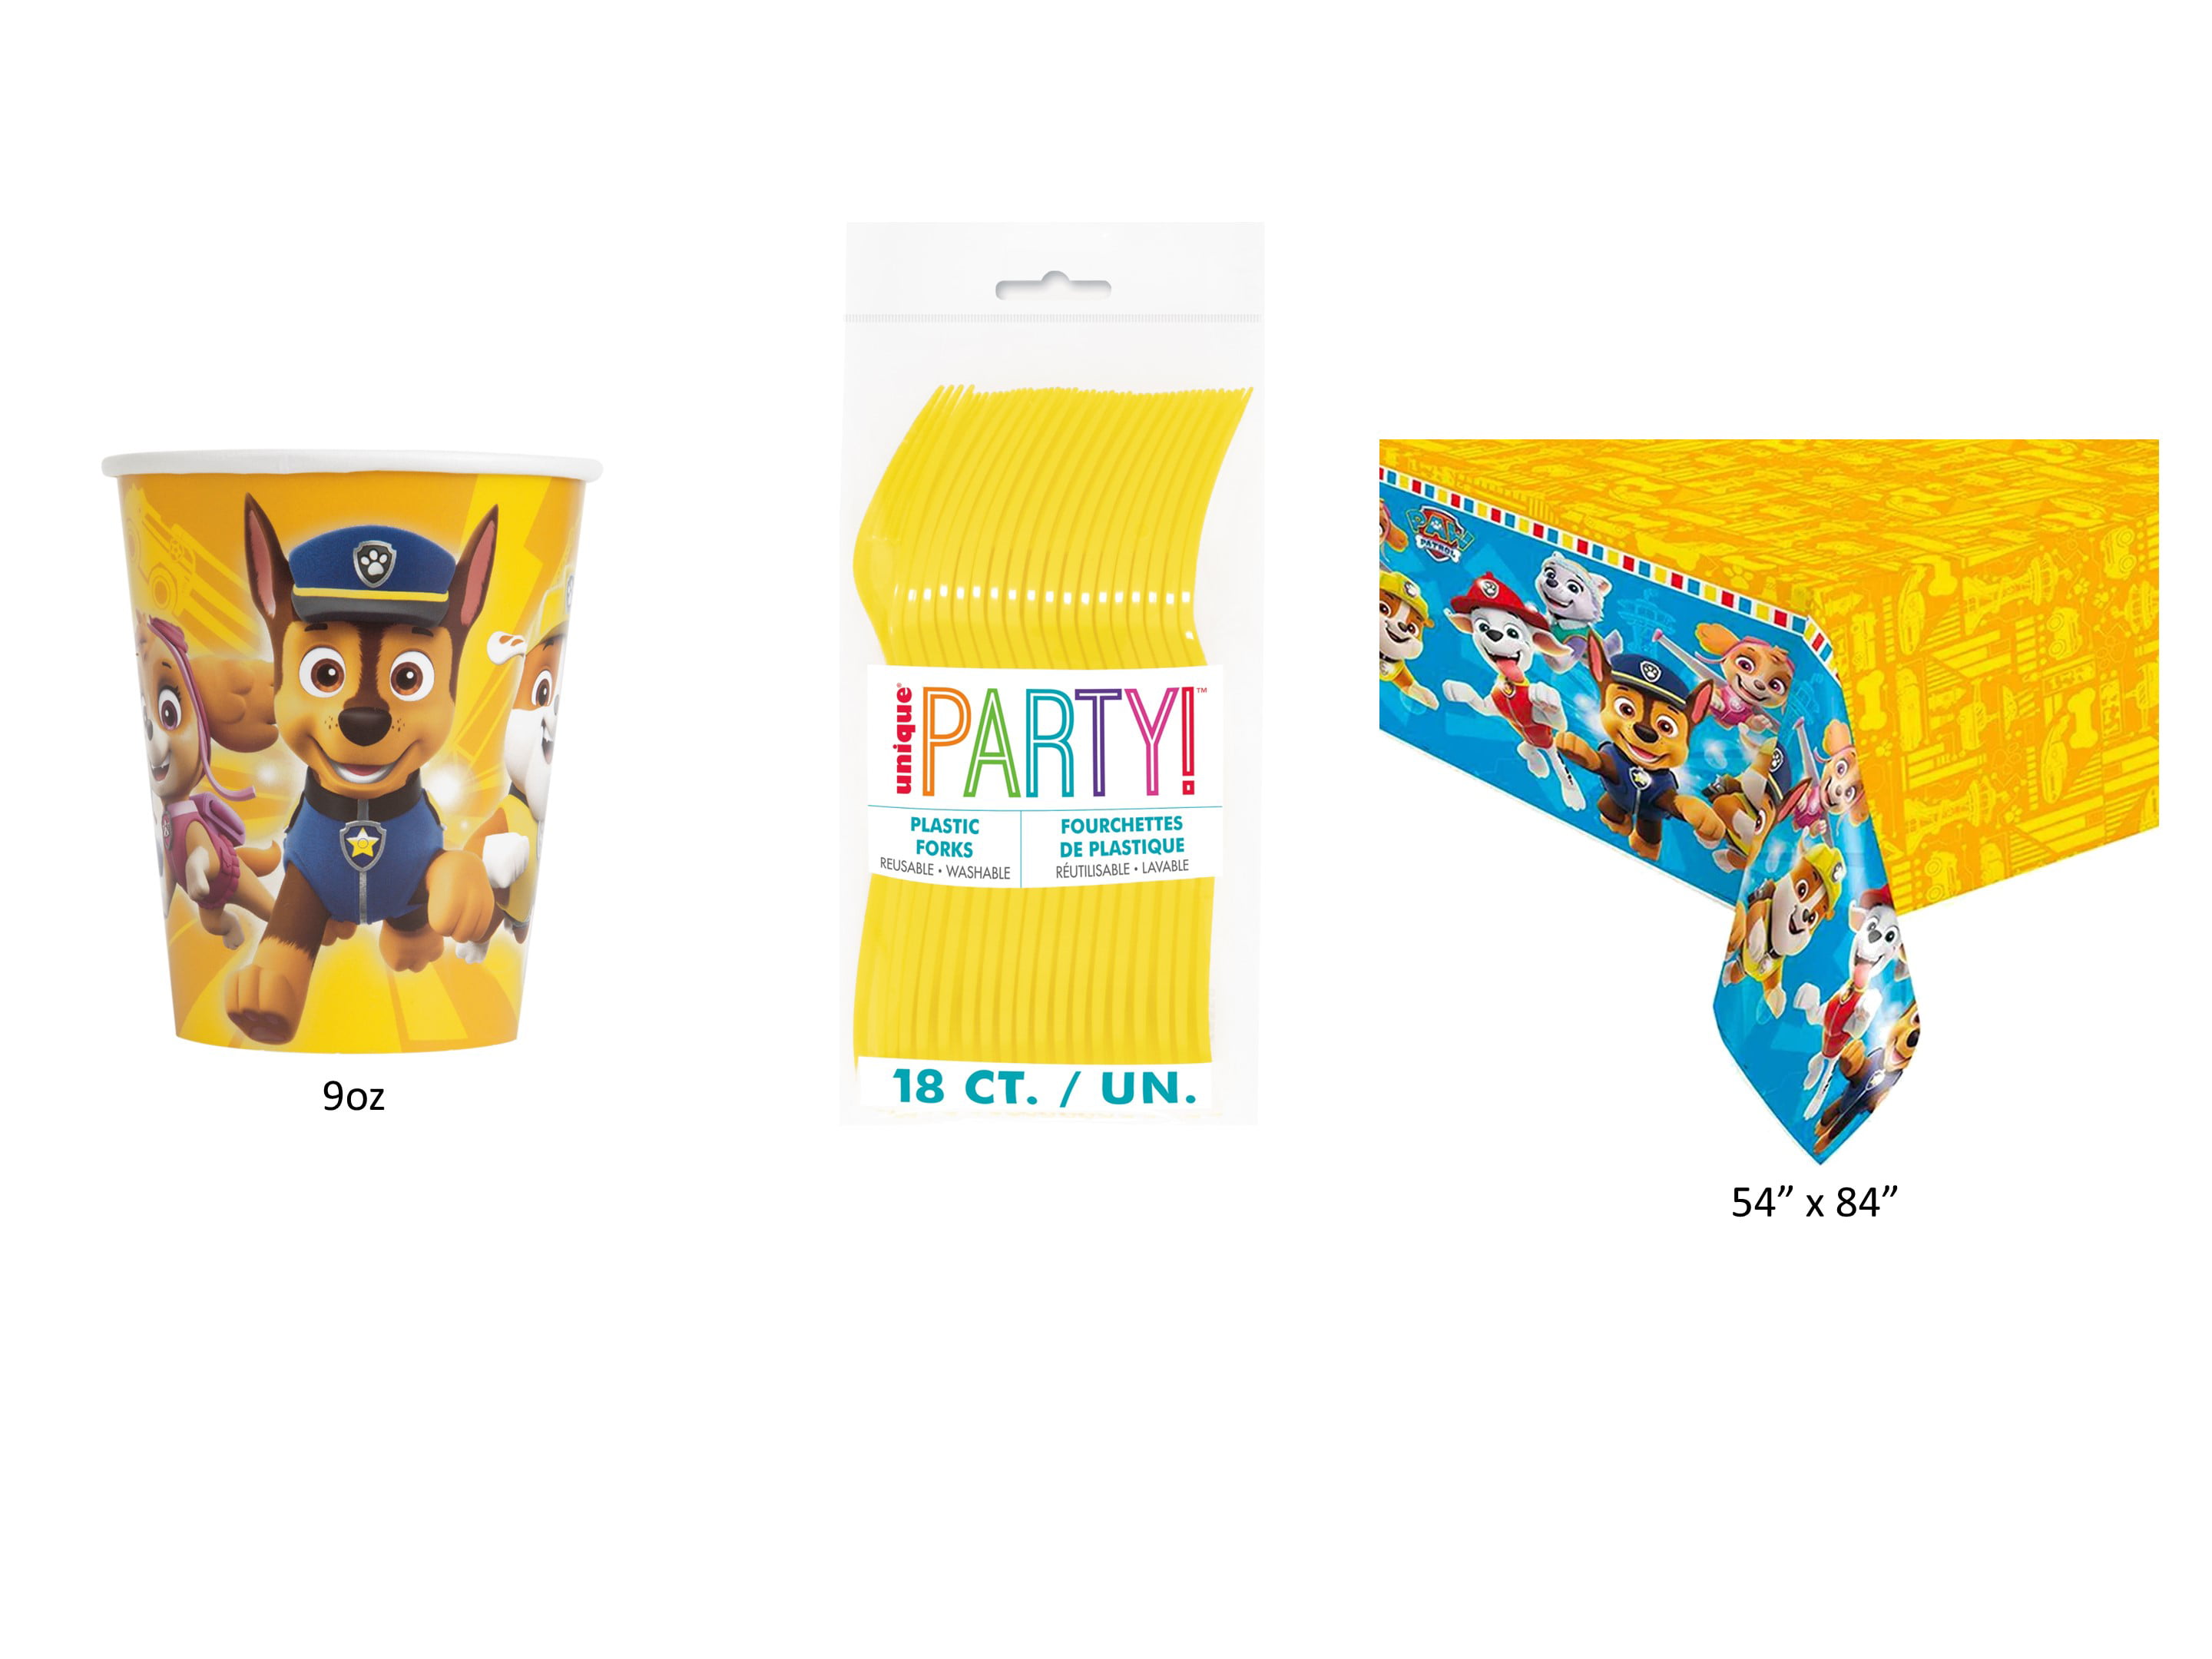 Paw Patrol Party Supplies - Serves 32 - Plates (9), Napkins, Cups, Paw  Straws - Disposable Kids Birthday Dinnerware Bundle with decorative design